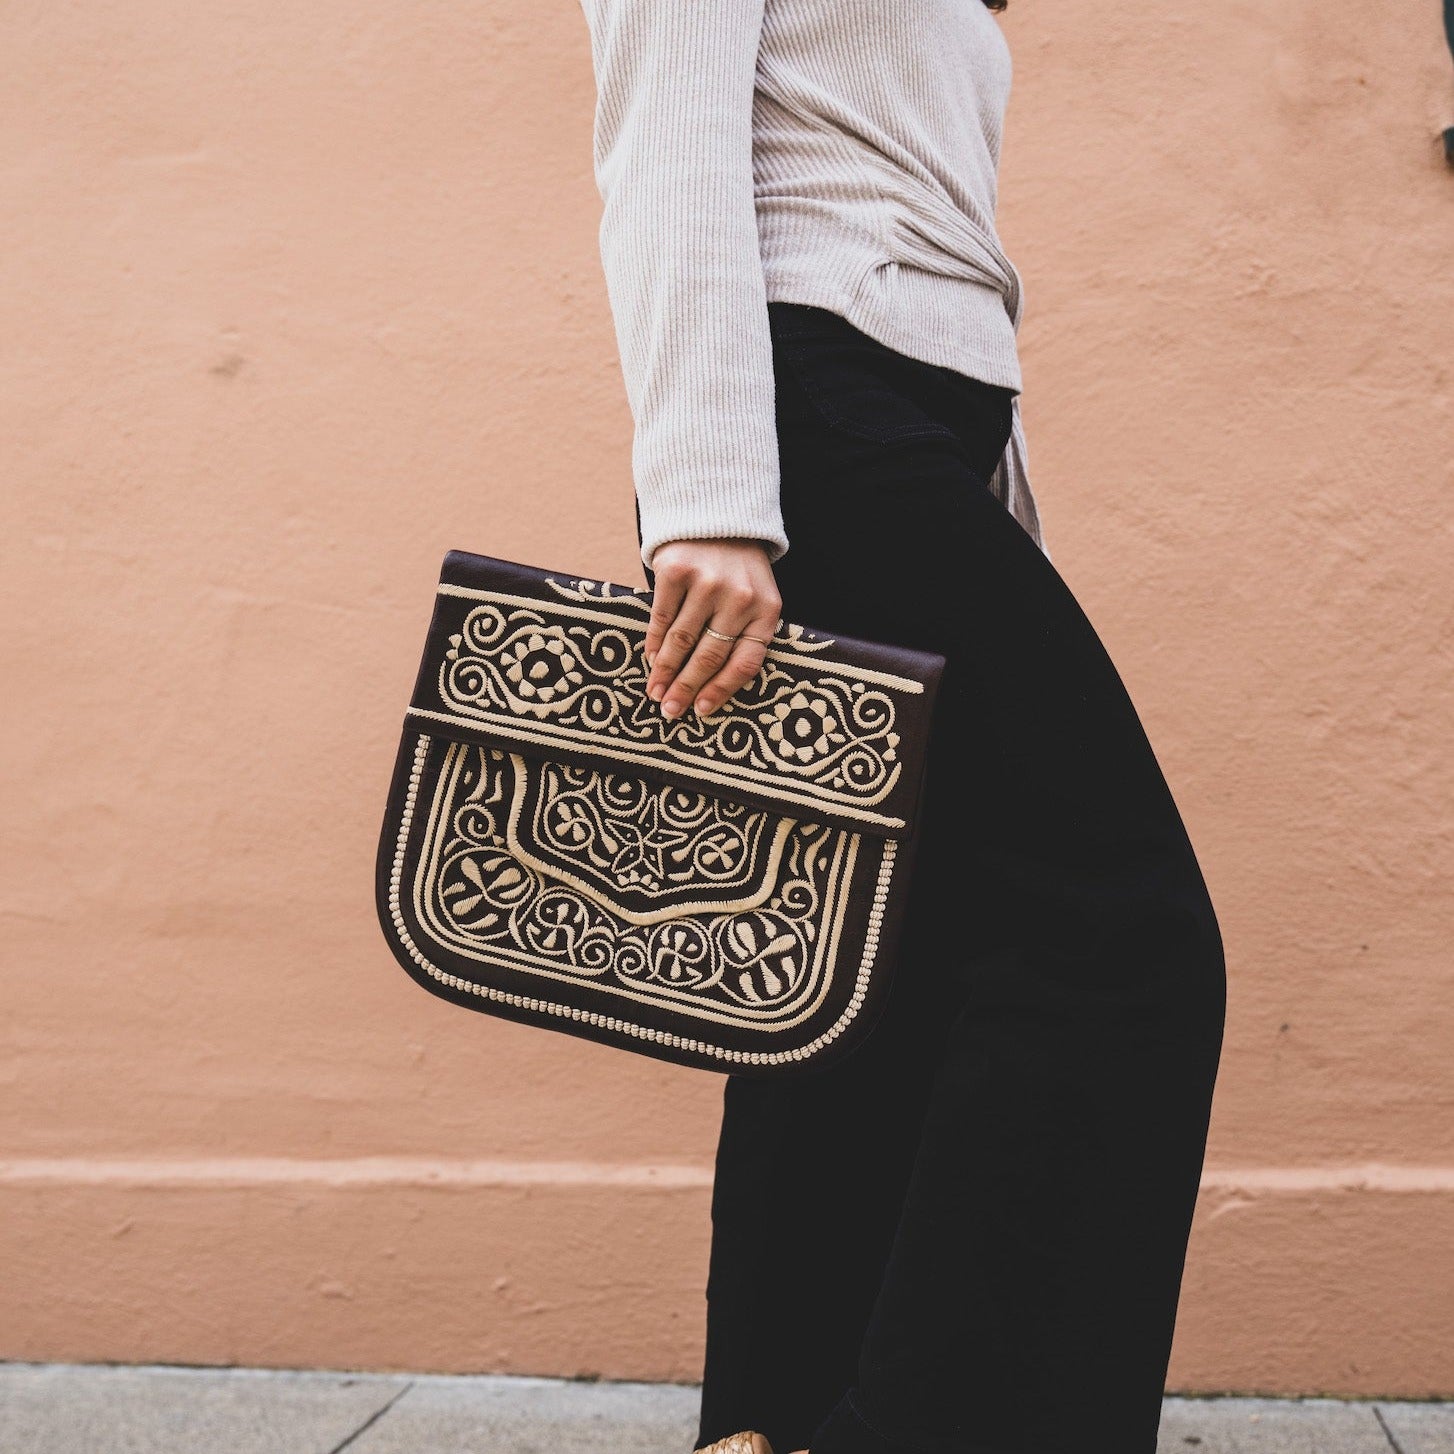 Embroidered Leather Satchel from Morocco